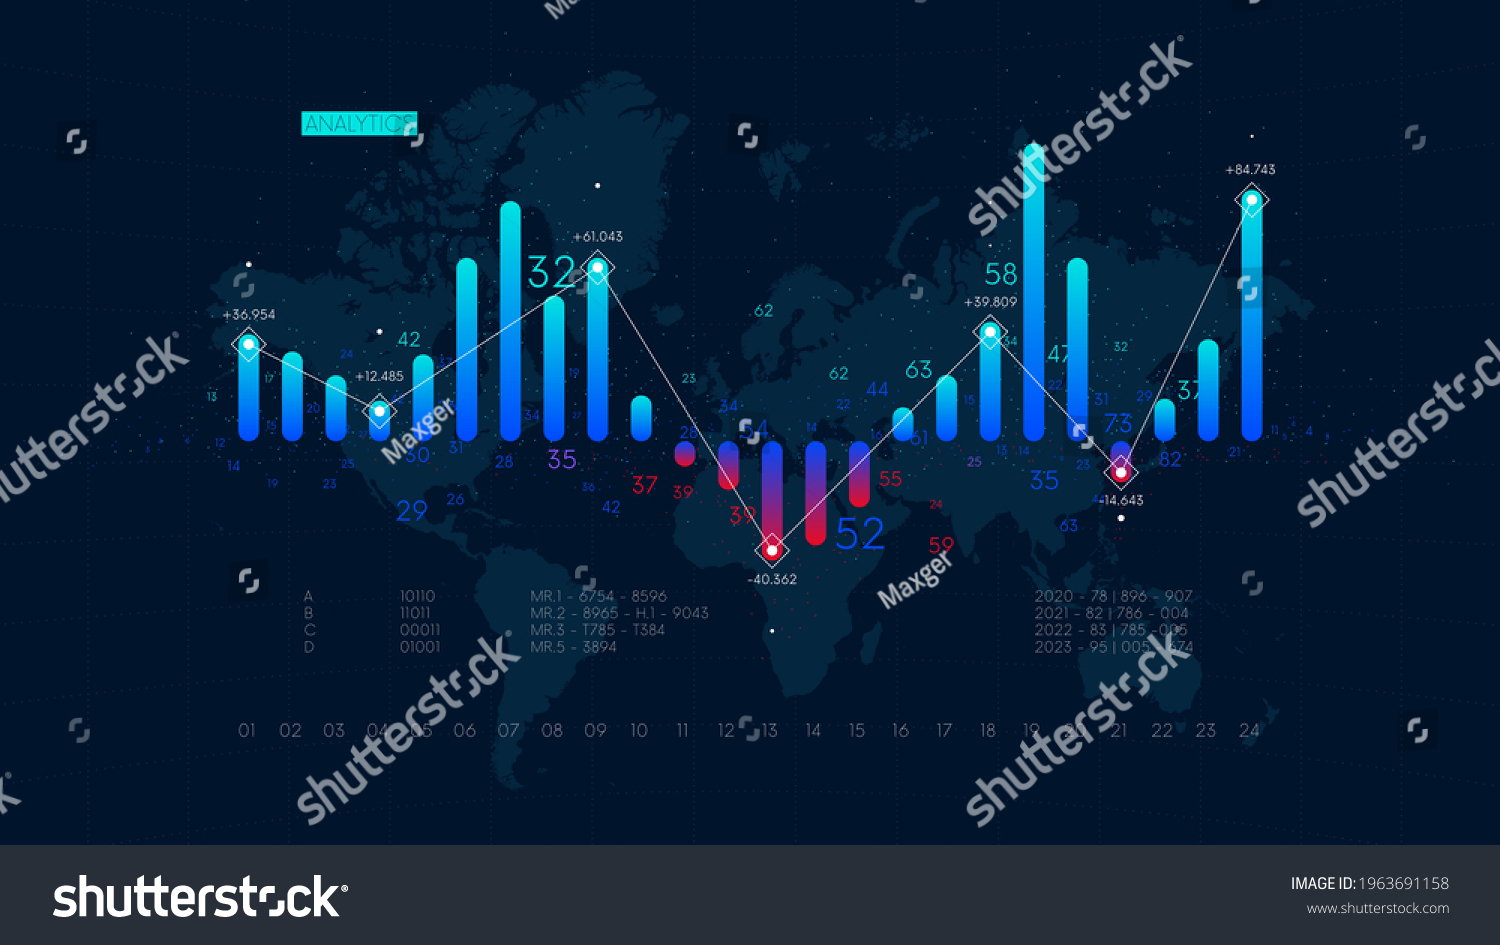 SVG of Financial big data analytic and business infographic, analysis and charts investment and trade, columns, market economy information vector background svg